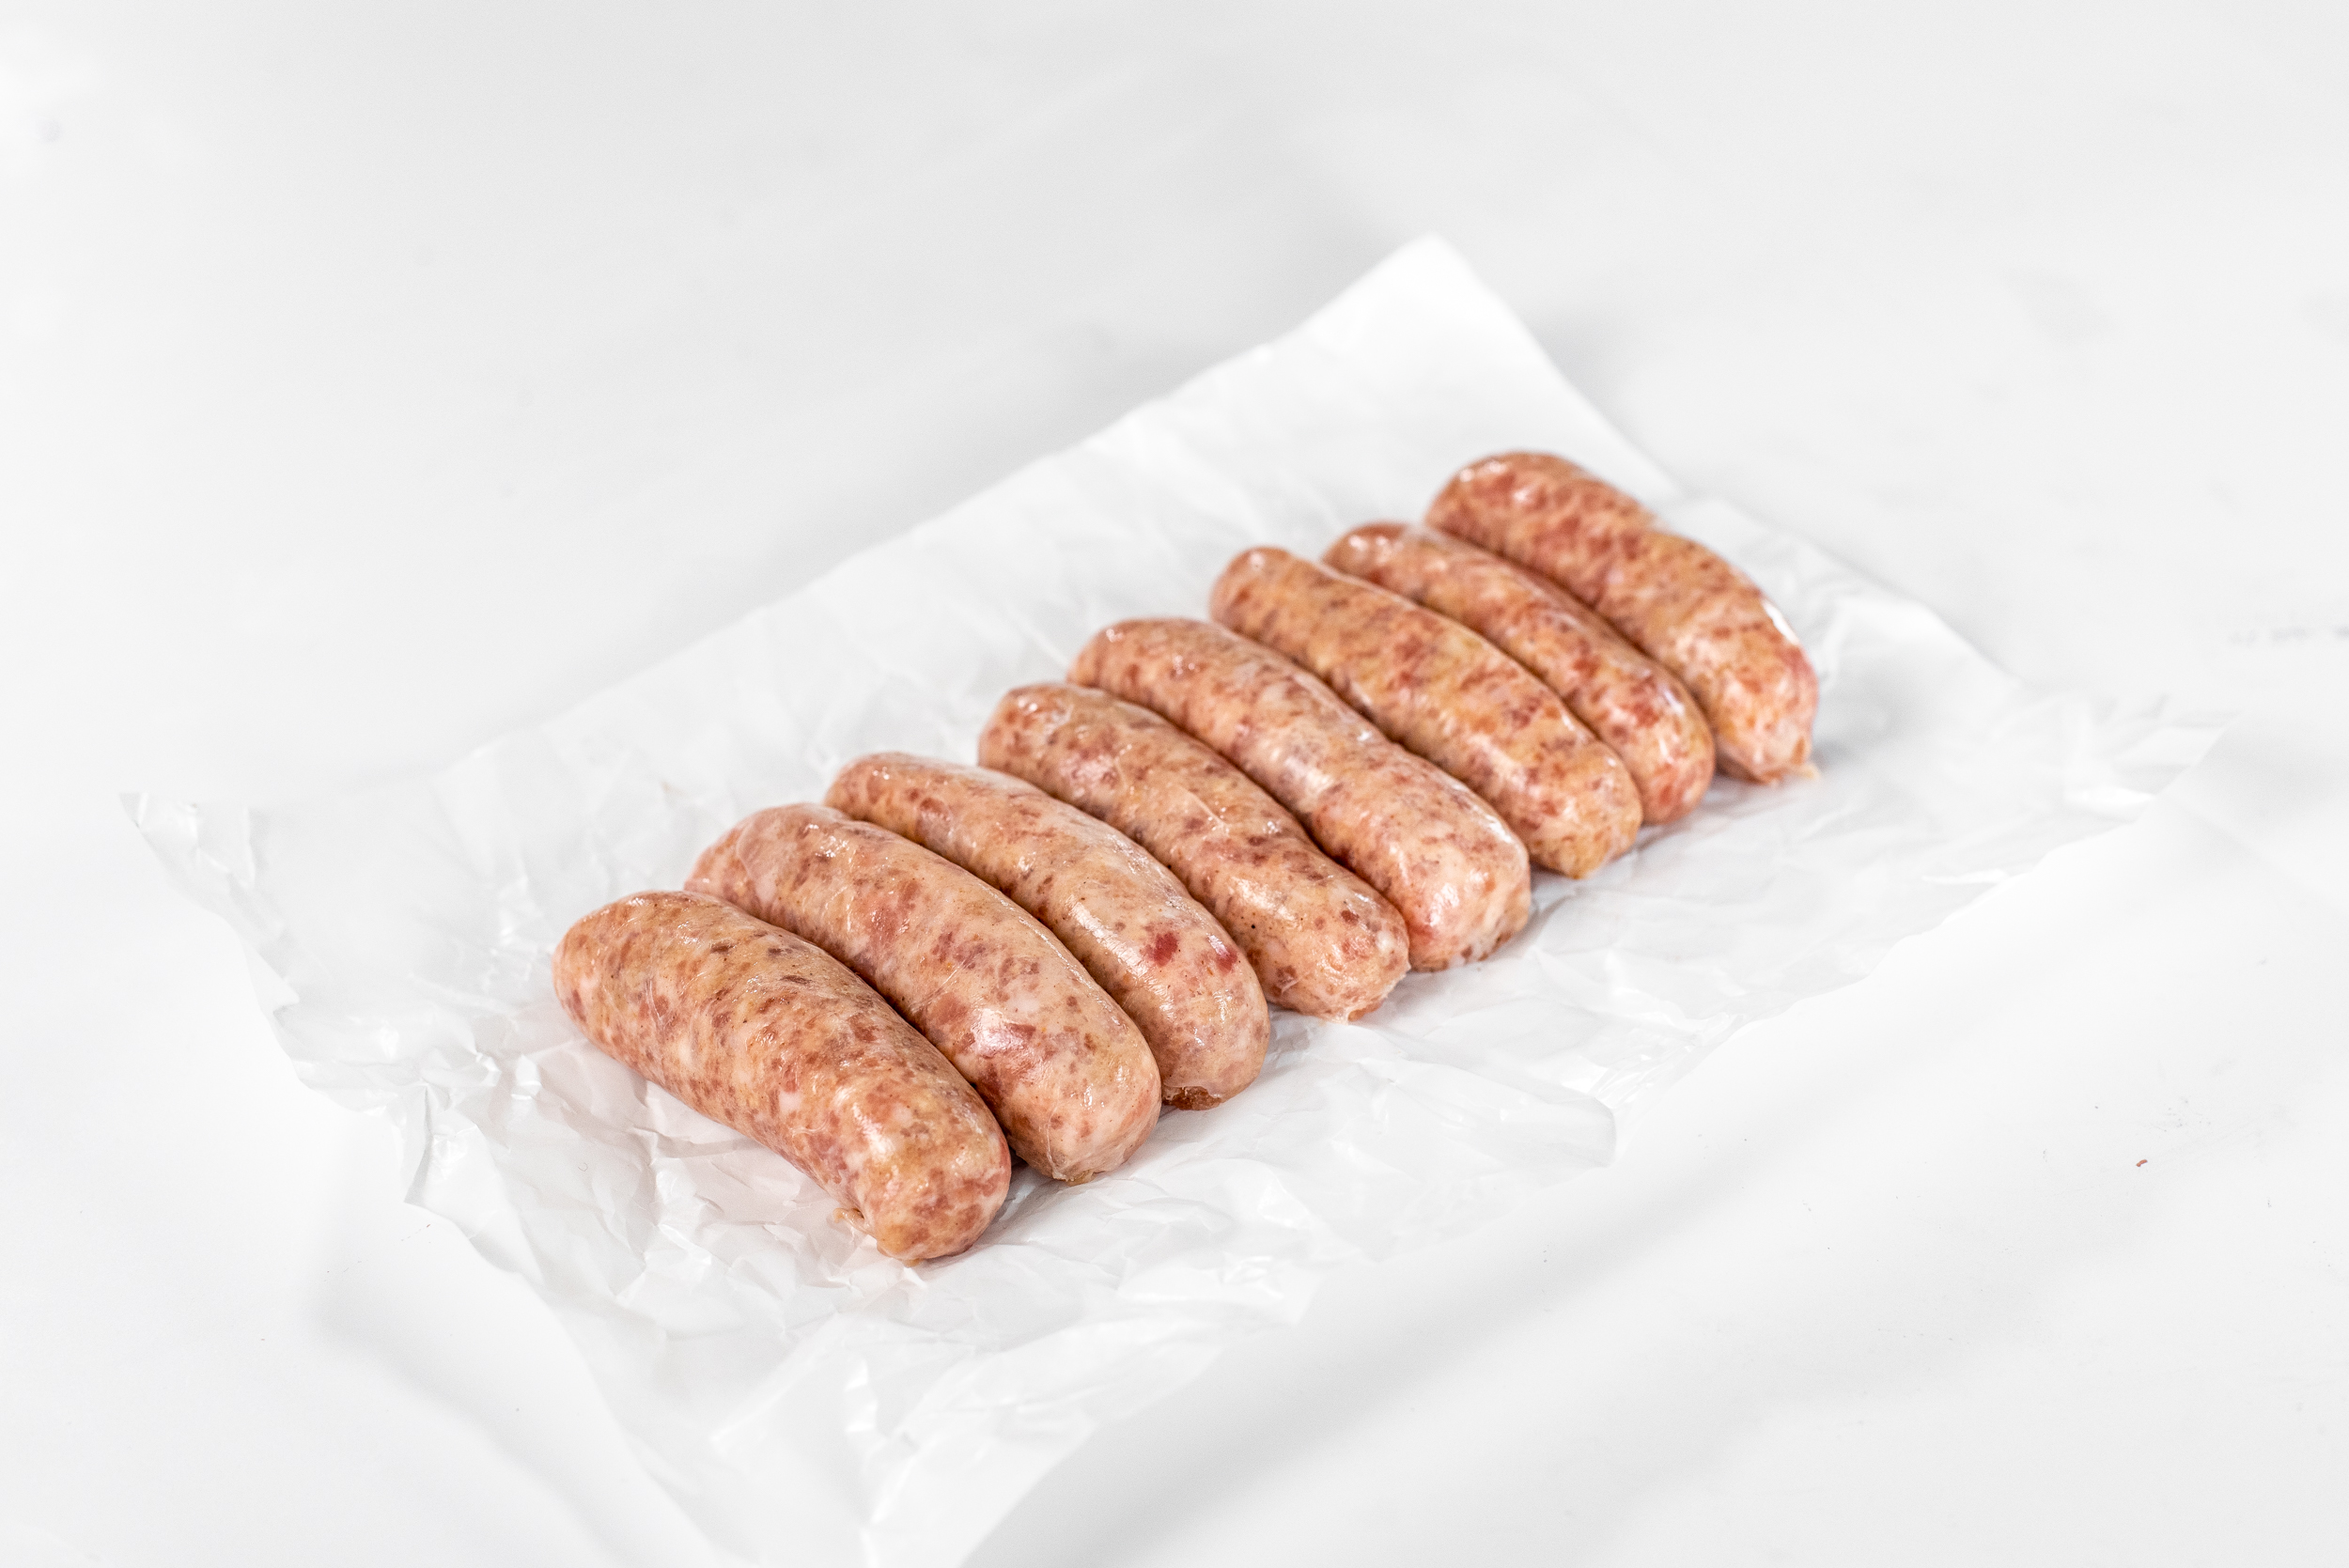 The Gog Traditional Pork Sausages (8 Pack)